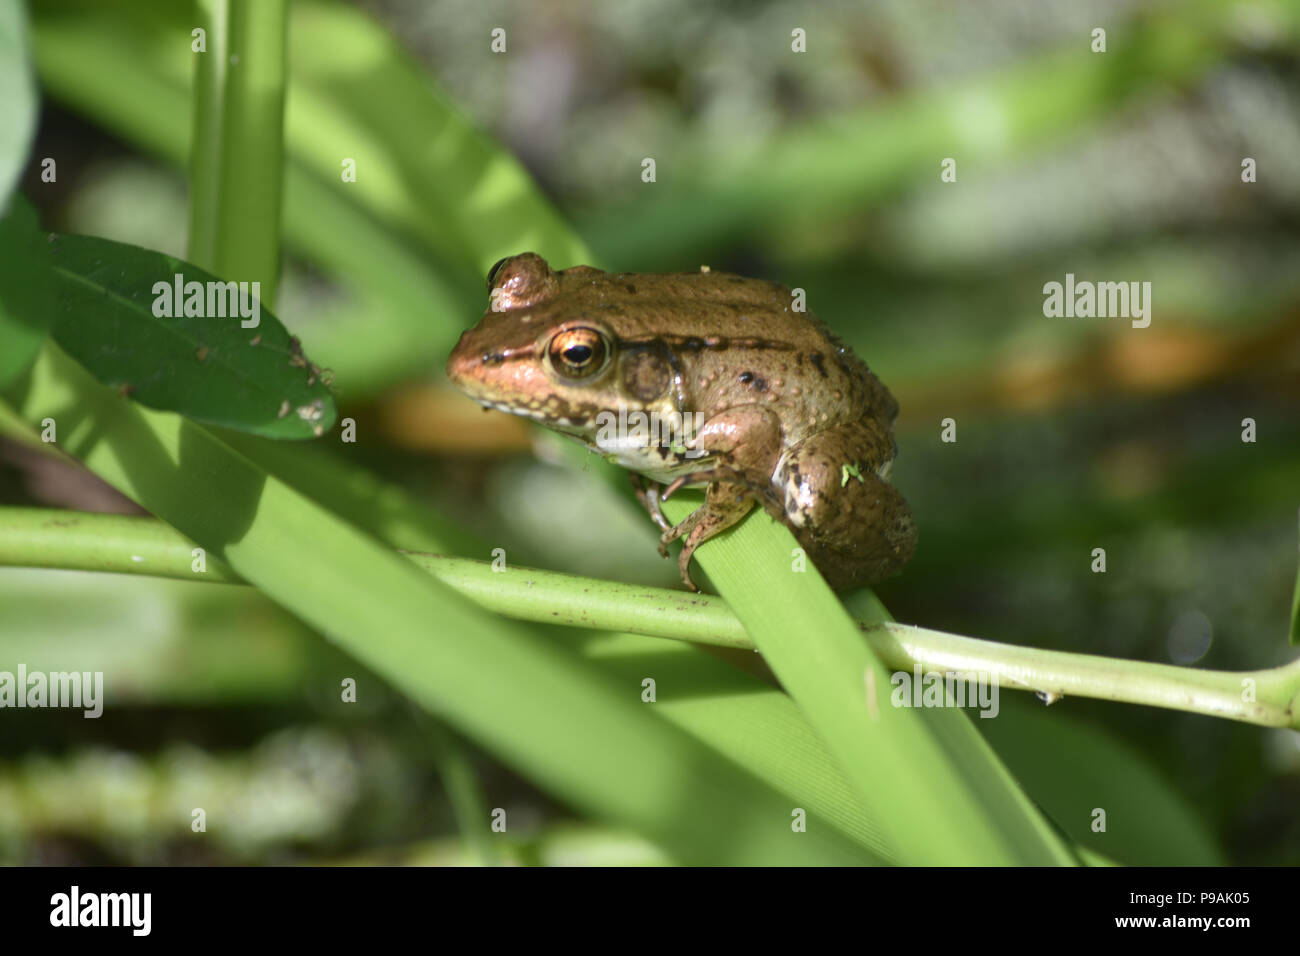 Frog sitting on a plant in the Barataria Preserve in Louisiana. Stock Photo